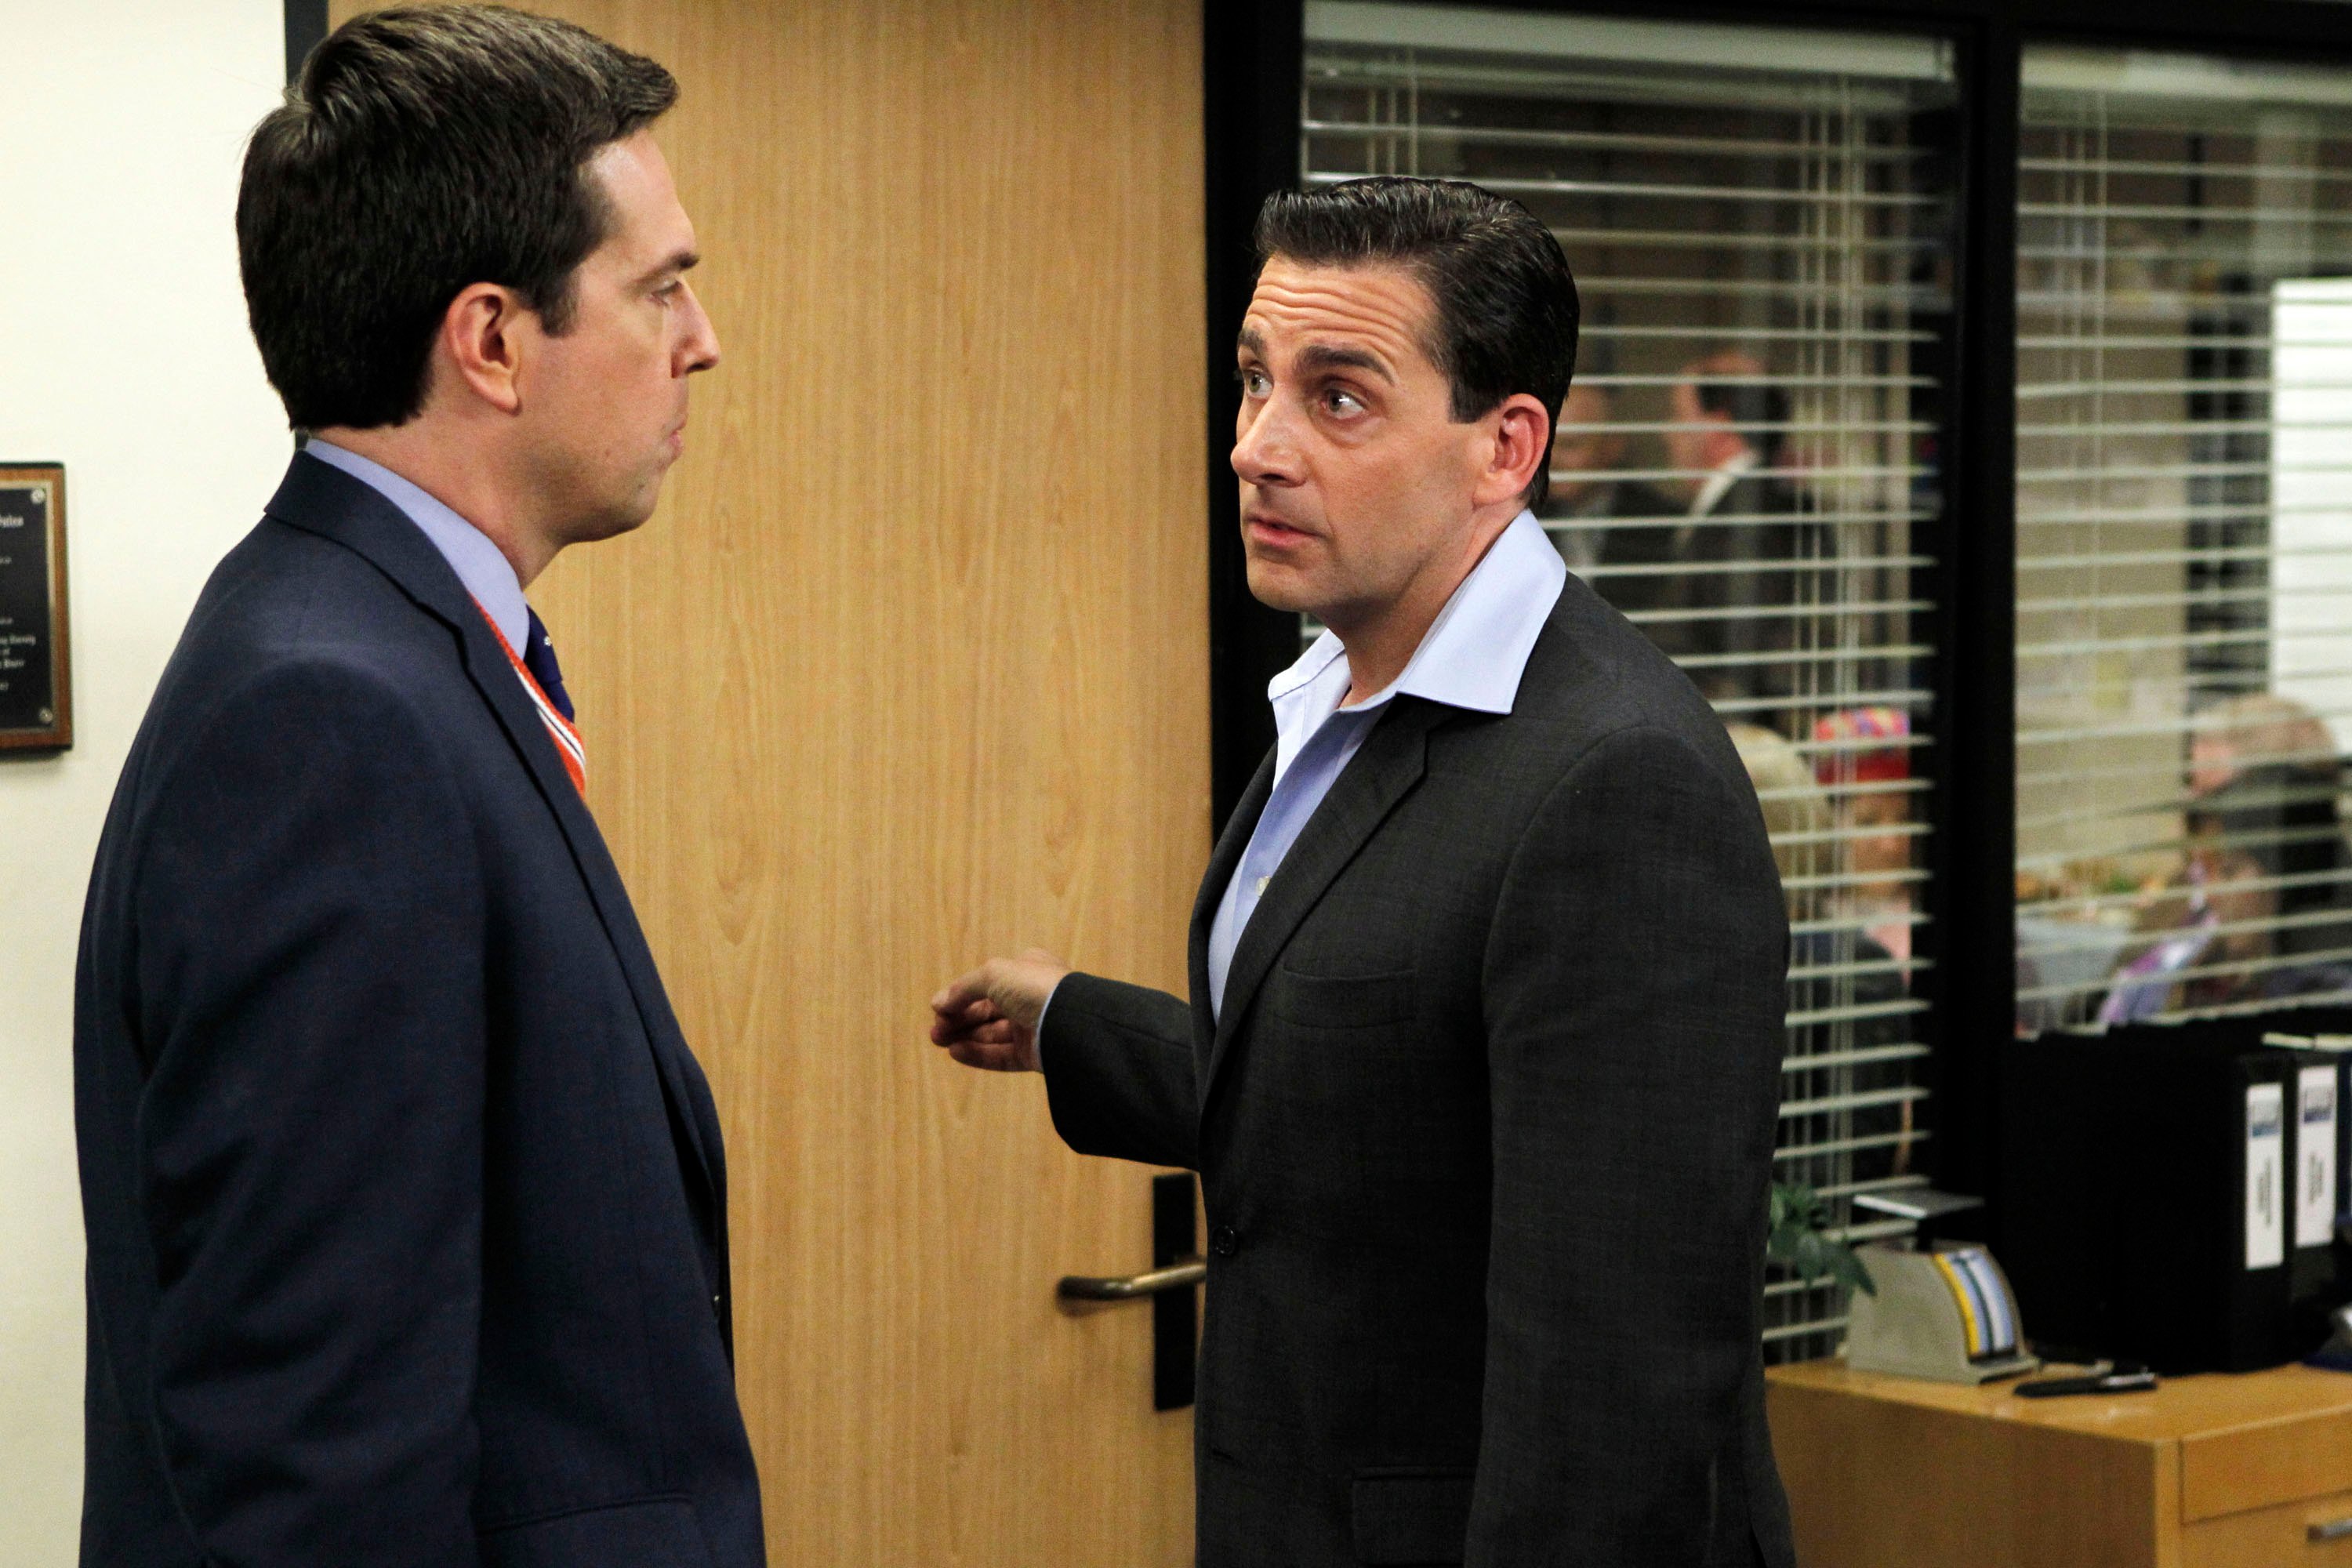 Ed Helms and Andy Bernard and Steve Carell as Michael Scott